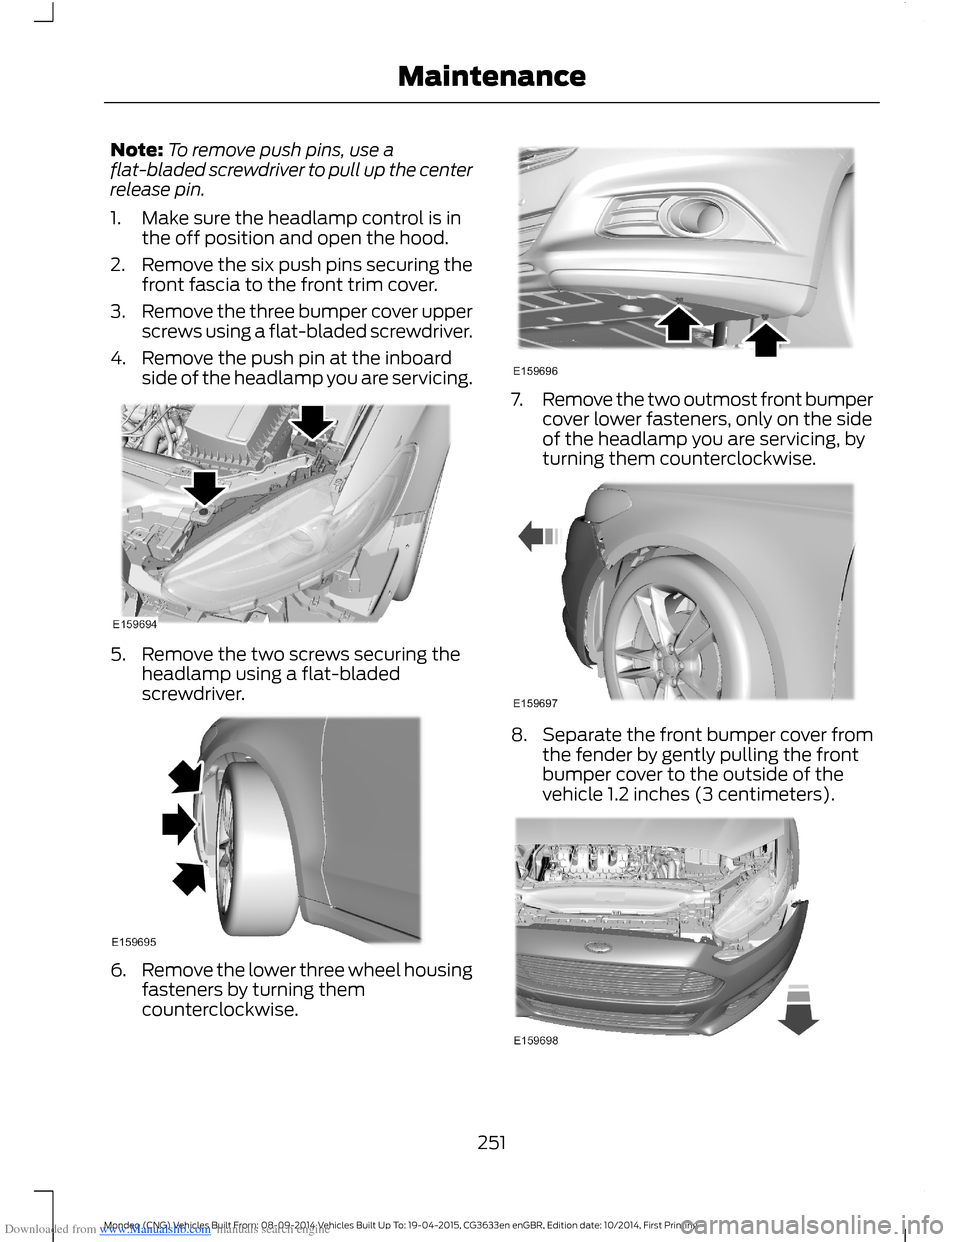 FORD MONDEO 2014 4.G Owners Manual Downloaded from www.Manualslib.com manuals search engine Note:To remove push pins, use aflat-bladed screwdriver to pull up the centerrelease pin.
1.Make sure the headlamp control is inthe off position